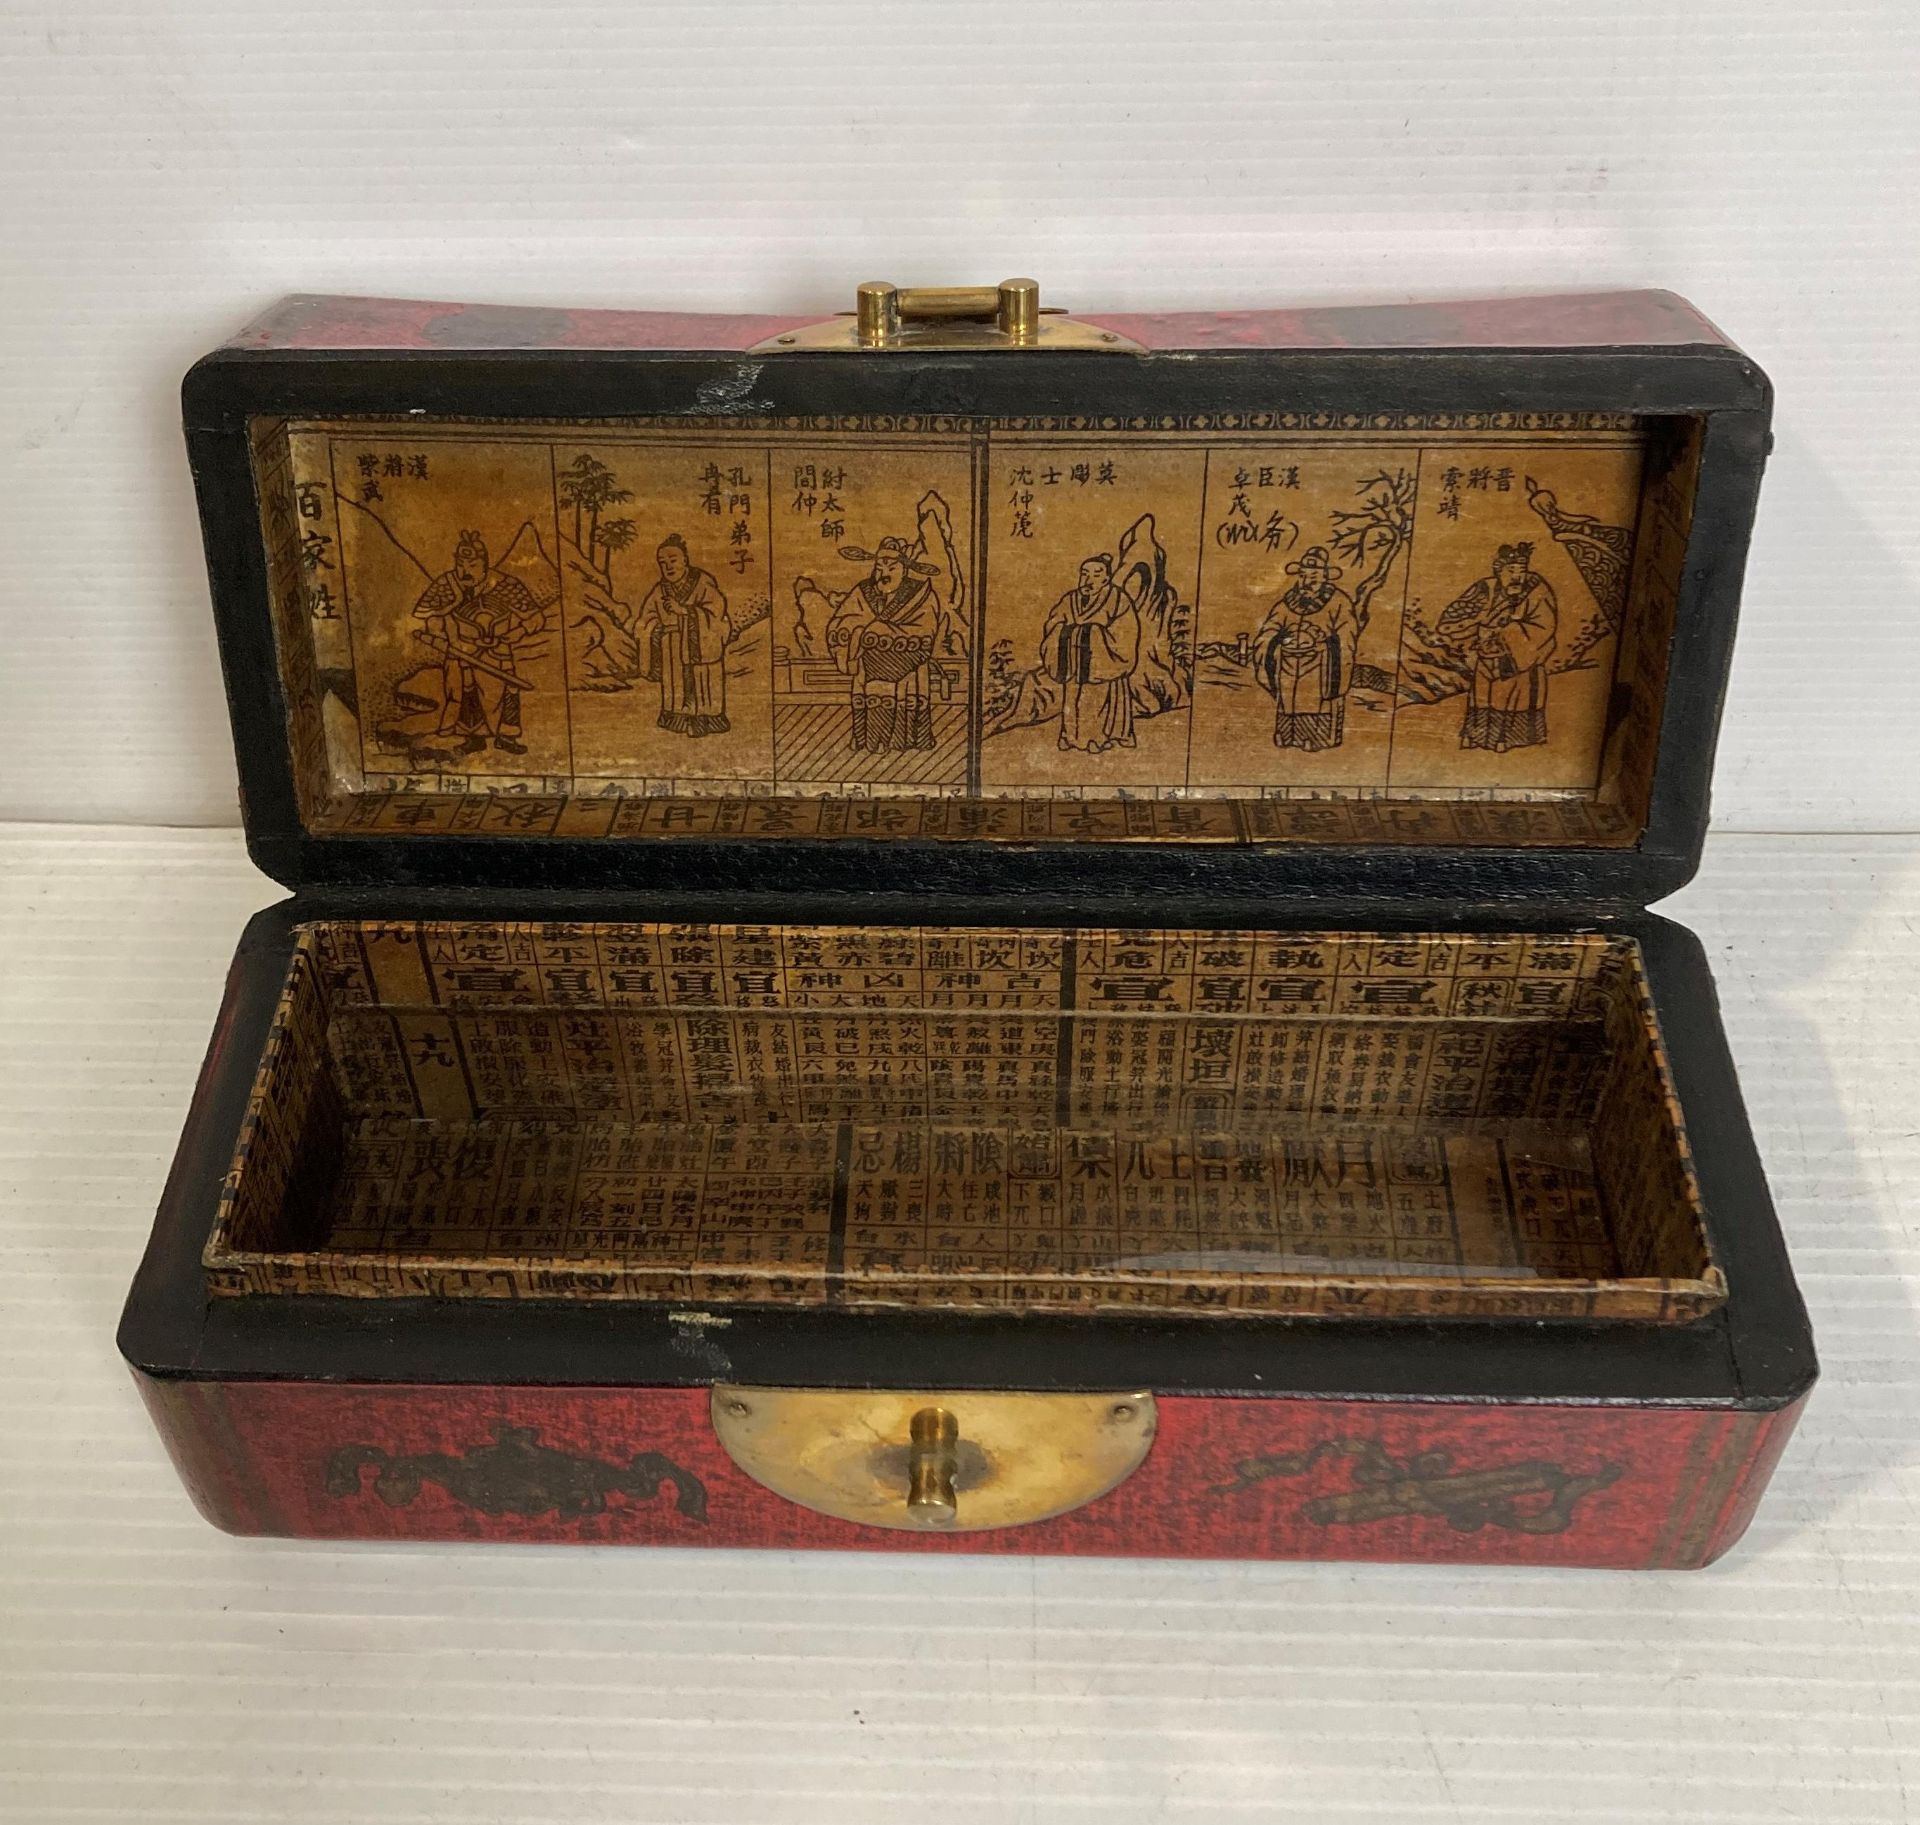 Two assorted Oriental boxes and two wooden circular stands (saleroom location: S2 QB14) - Image 3 of 8